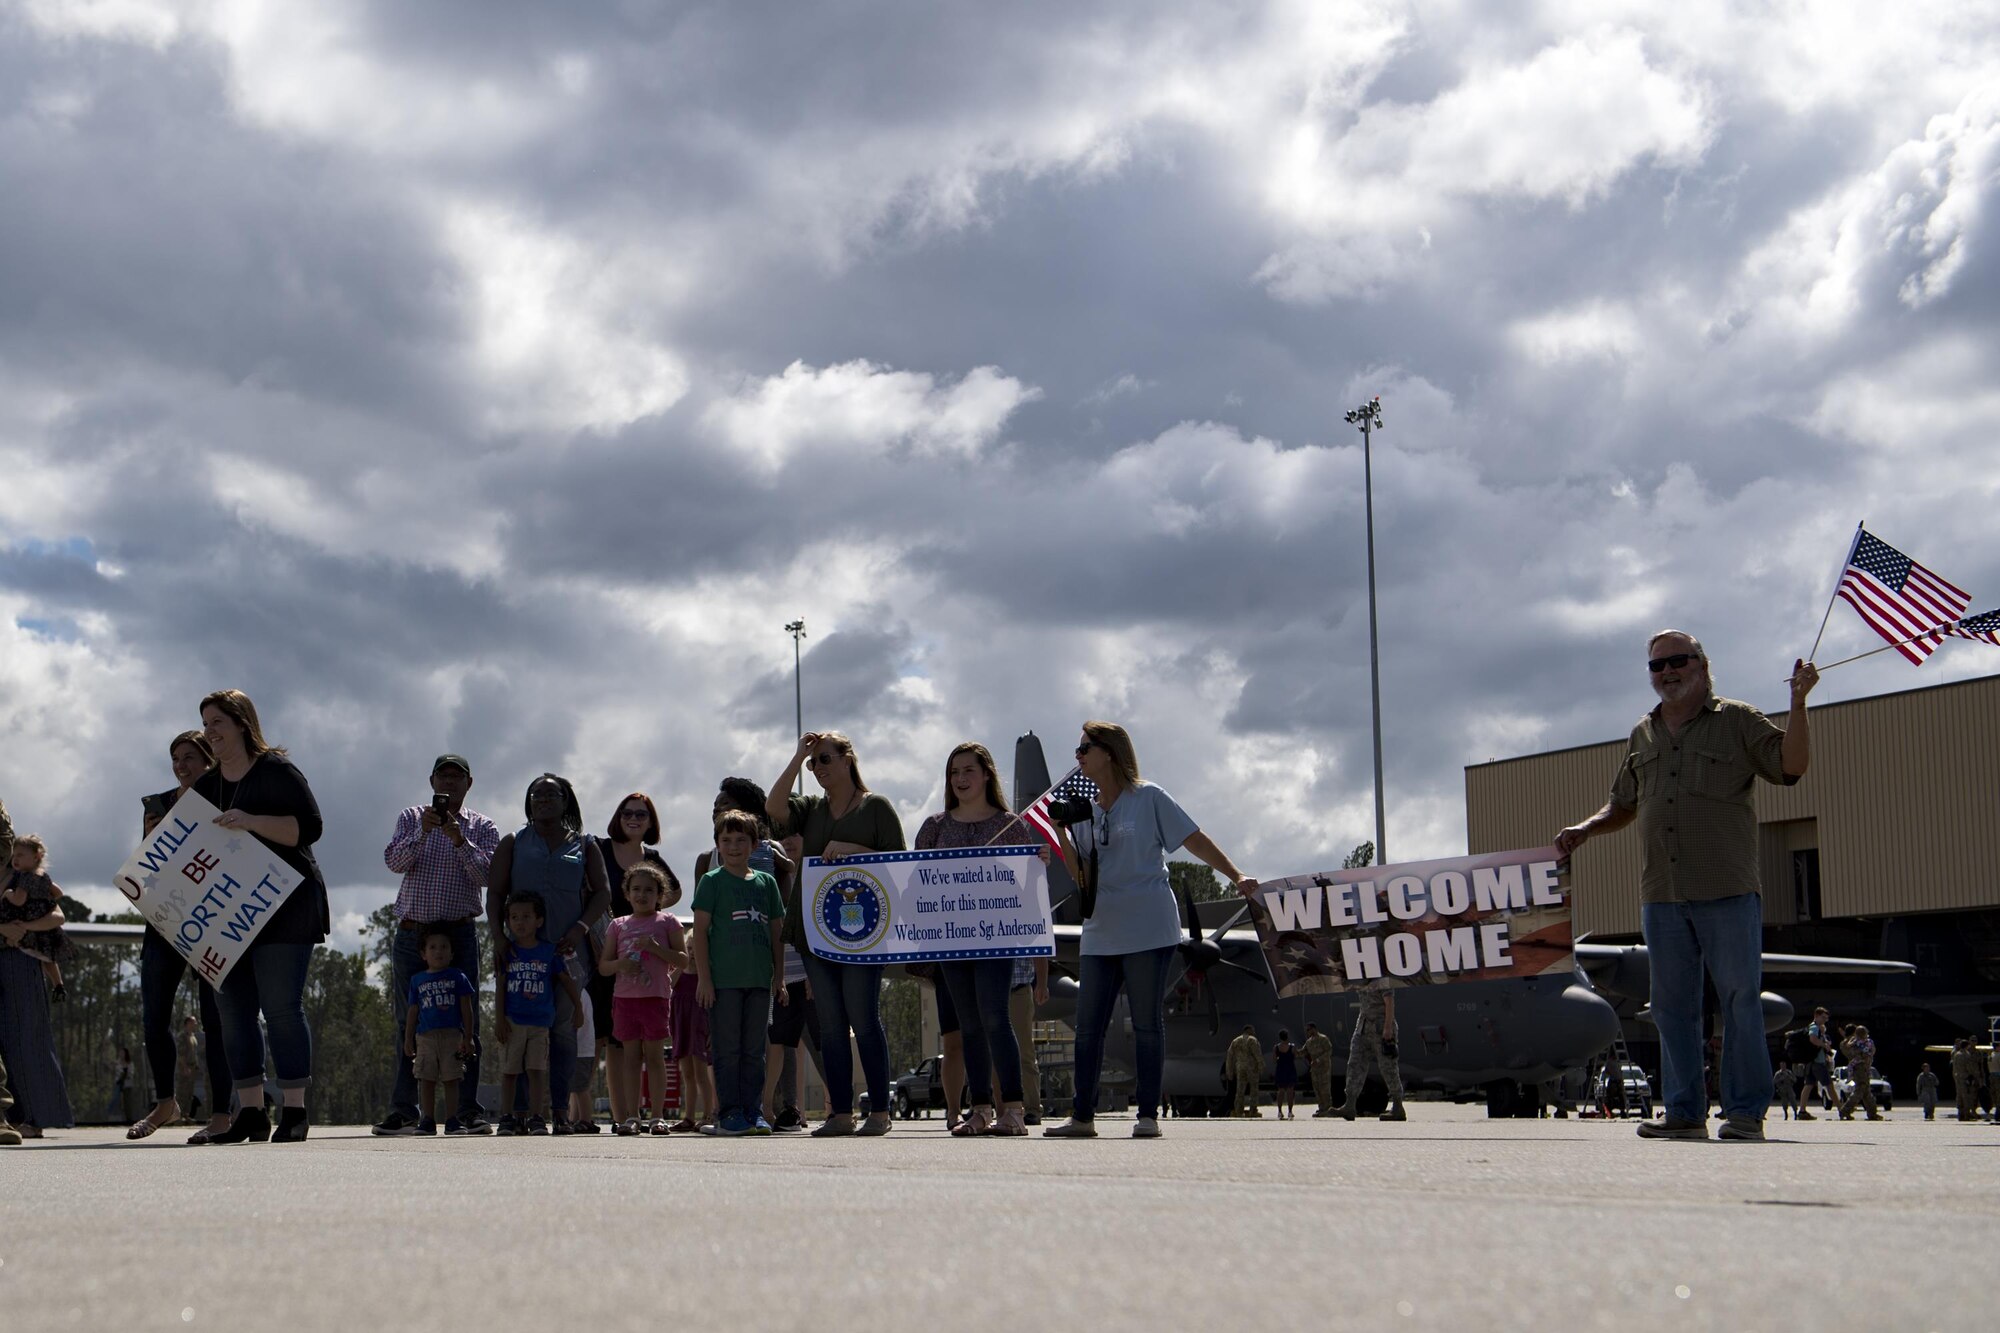 Airmen and families await the return of the 71st Rescue Squadron during a redeployment, Oct. 6, 2017, at Moody Air Force Base, Ga. Airmen from the 71st RQS supported deployed operations by providing expeditionary personnel with on-call recovery forces should they need rescued. (U.S. Air Force photo by Airman 1st Class Daniel Snider)